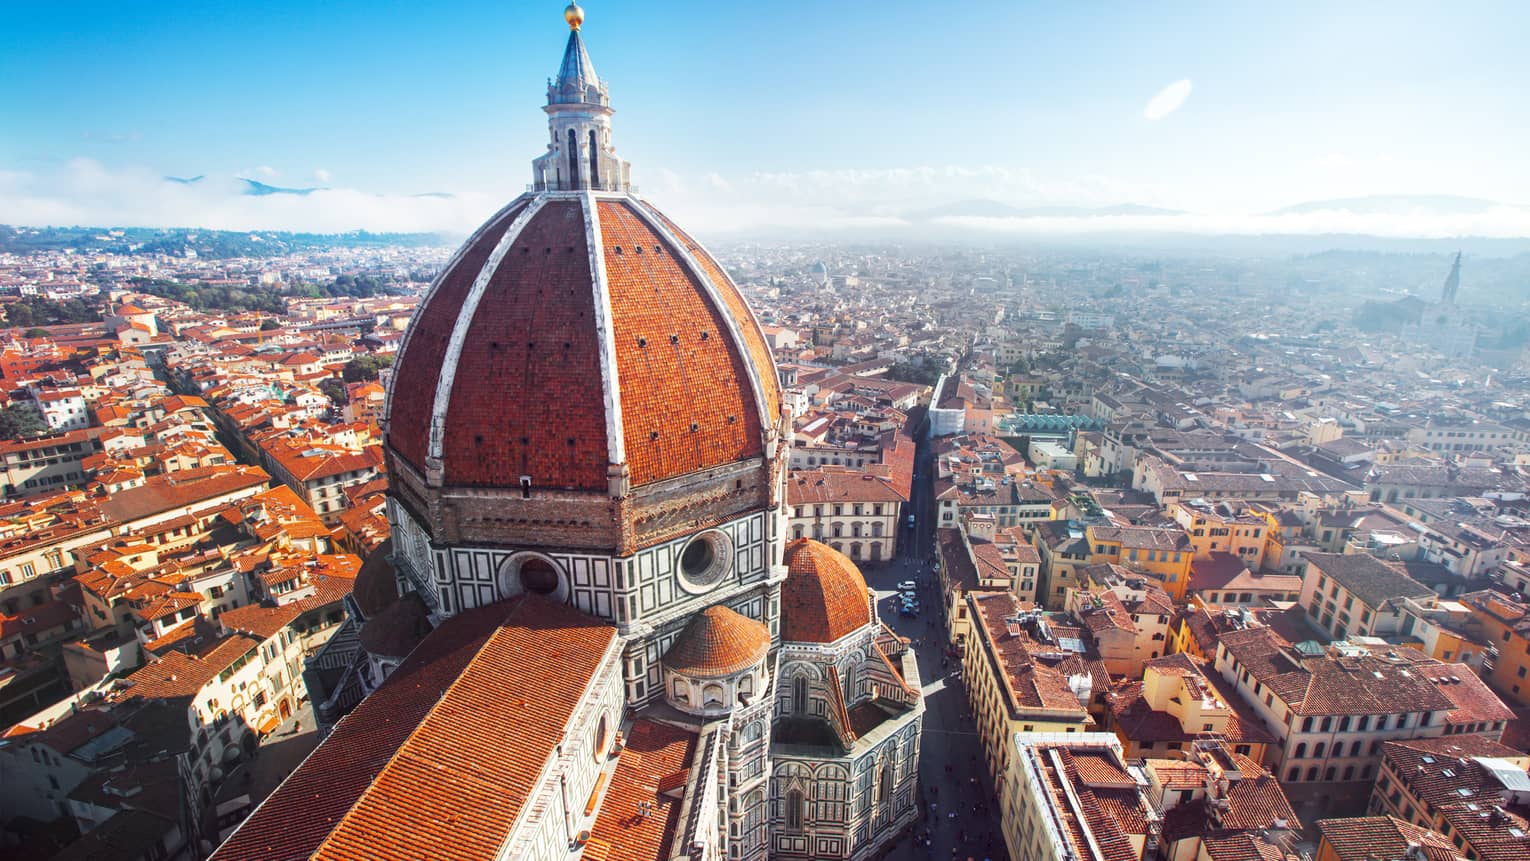 Aerial view of Florence city with red rooftops, Duomo cathedral dome against blue sky